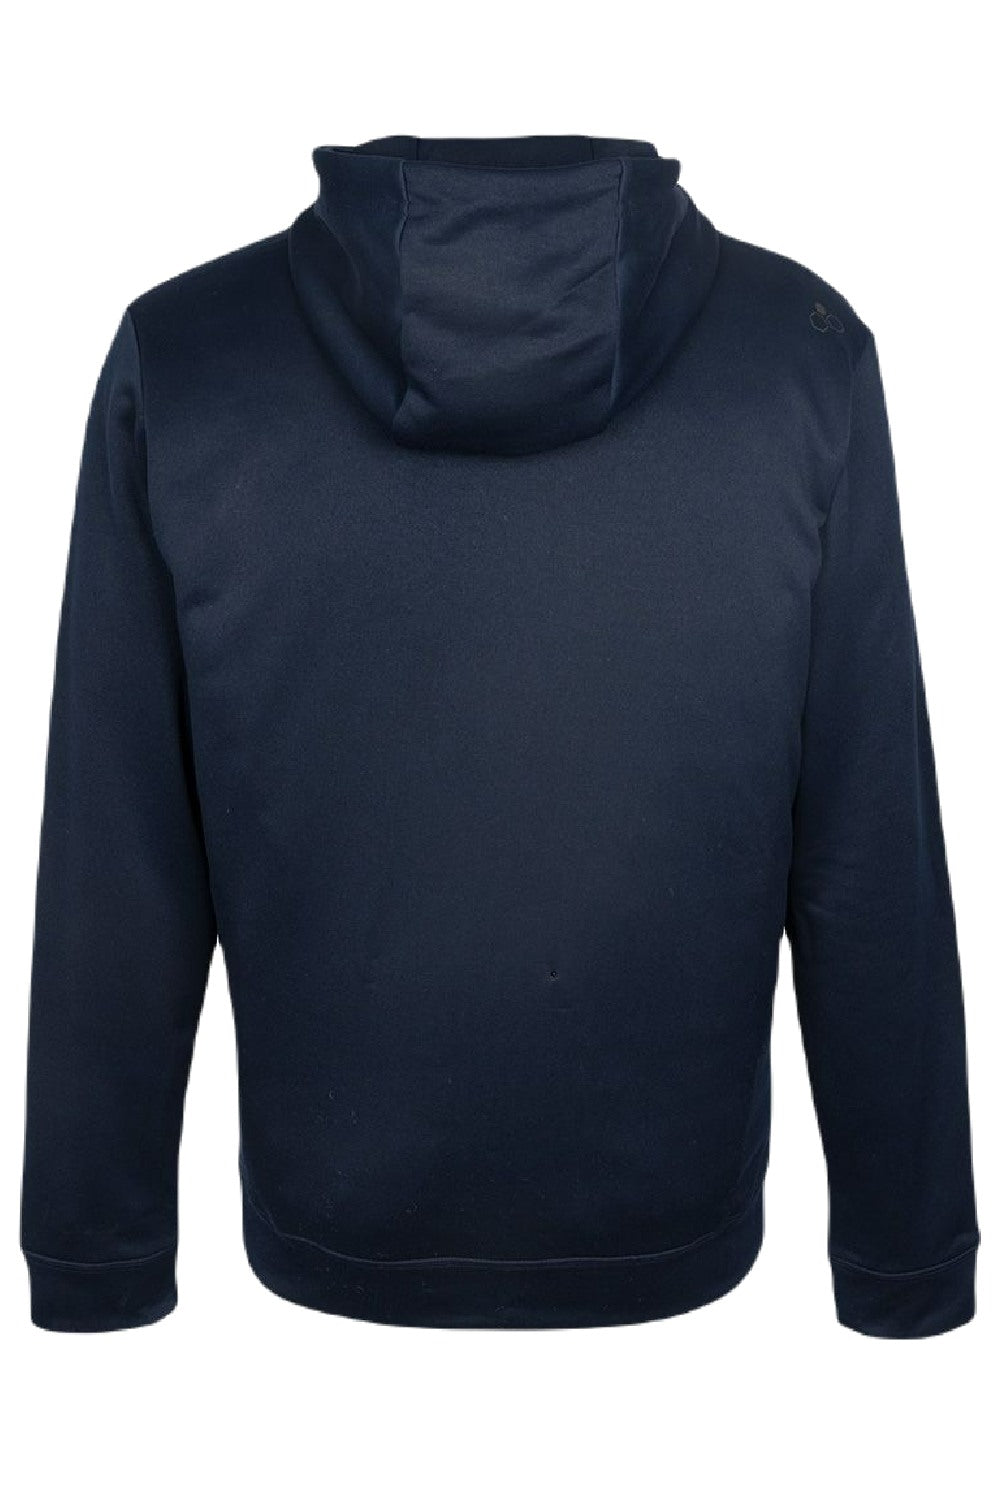 Musto Land Rover Hoodie in Navy